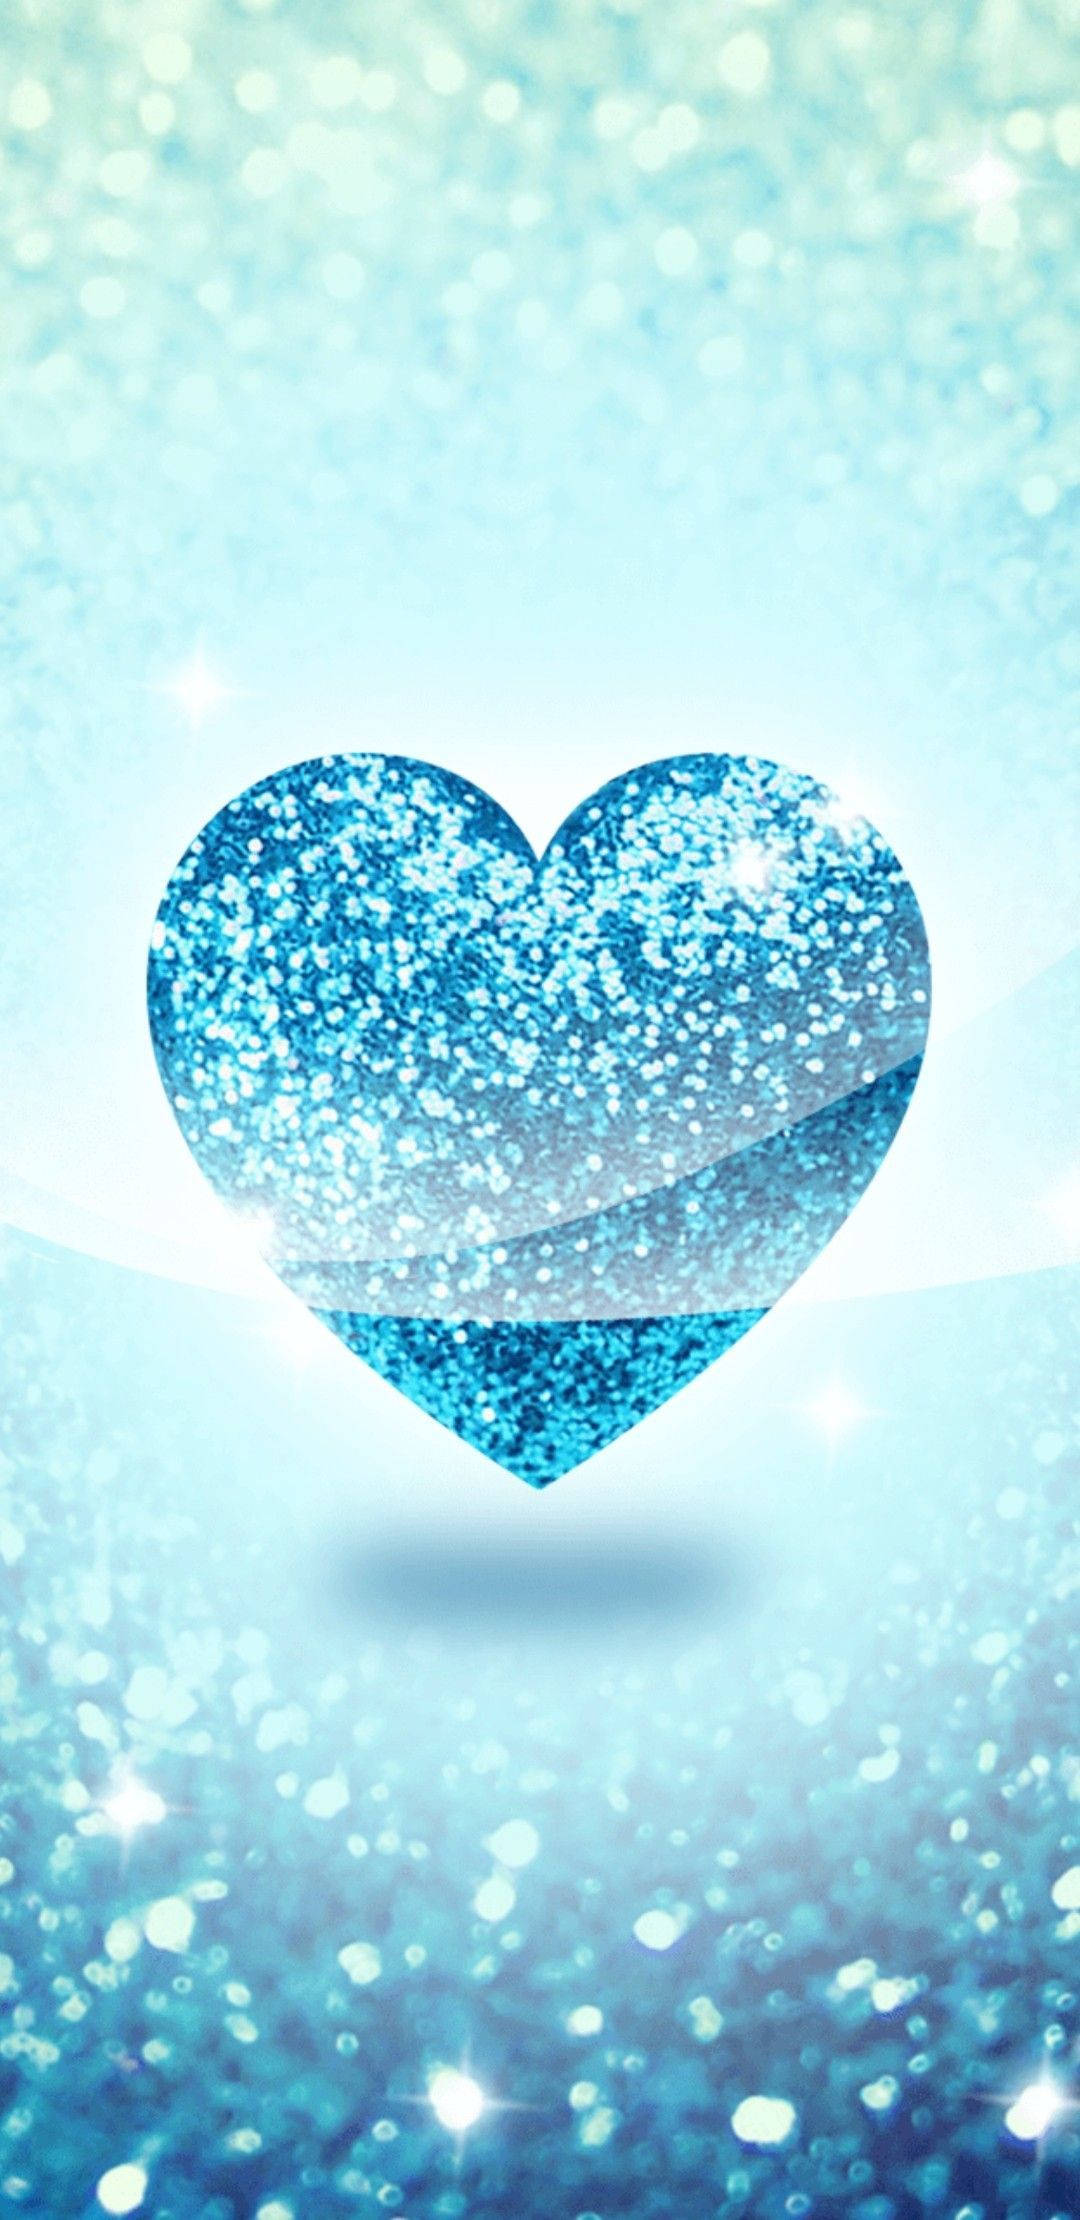 Gorgeous Blue Heart Iphone Display Wallpaper